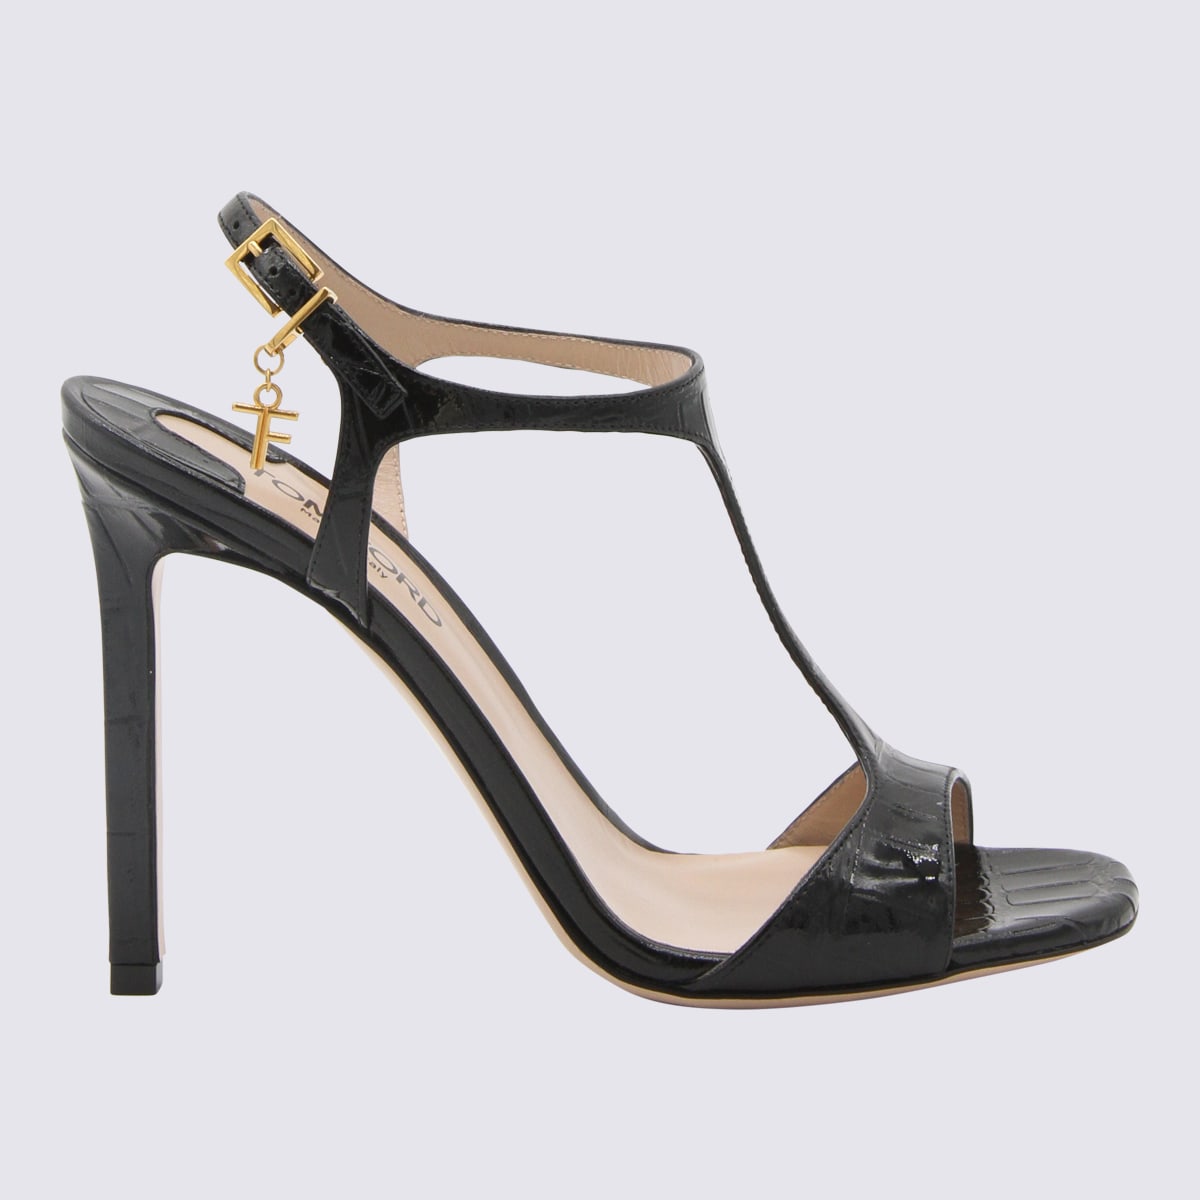 Tom Ford Black Leather Patent Sandals